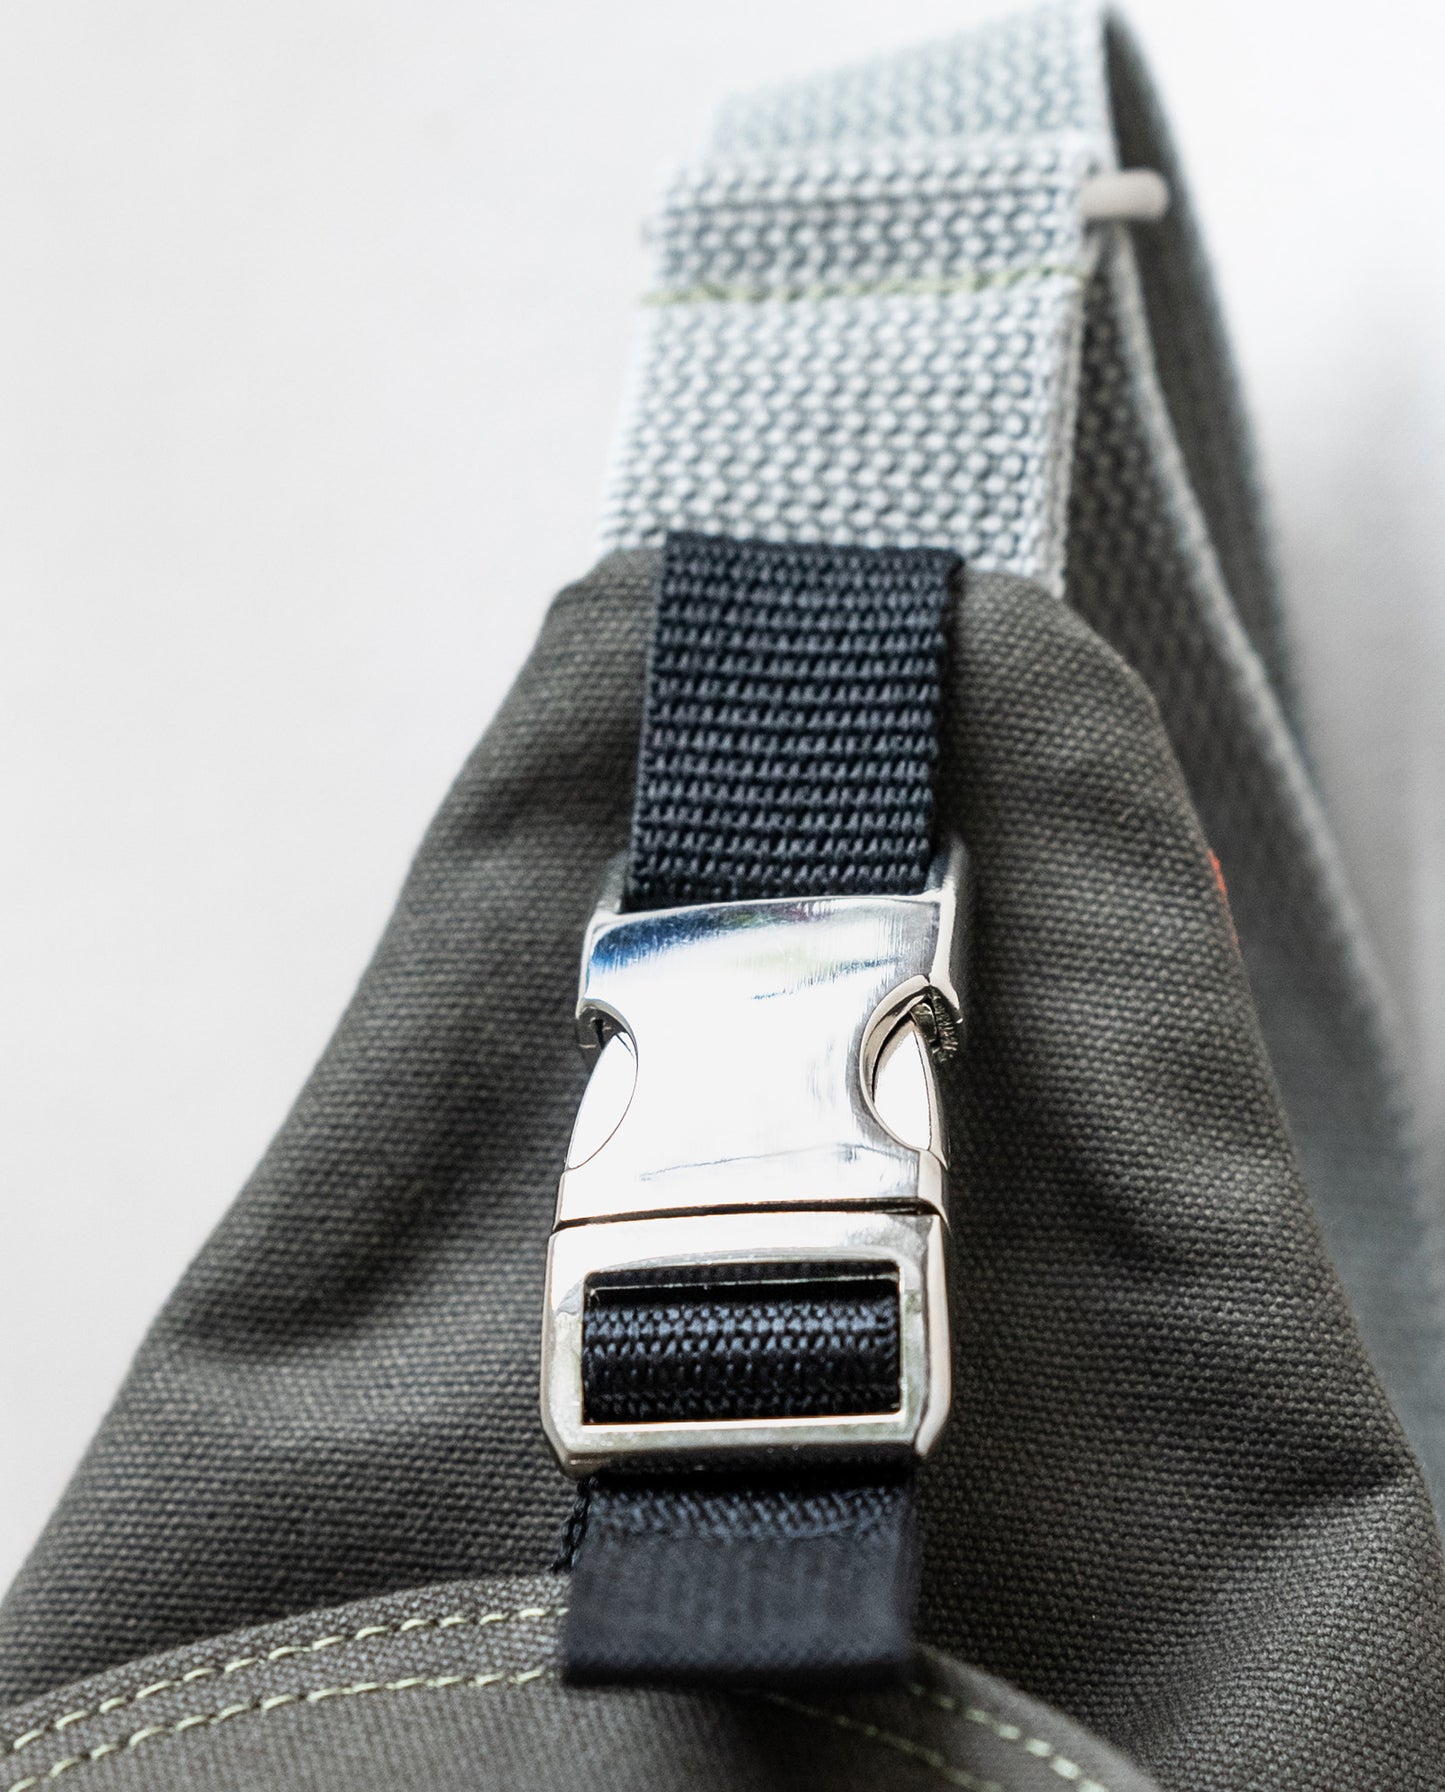 An aluminum side-squeeze buckle secures the front flap of Dock 5’s spacious, hand-sewn Dragonfly Canvas Sling Bag